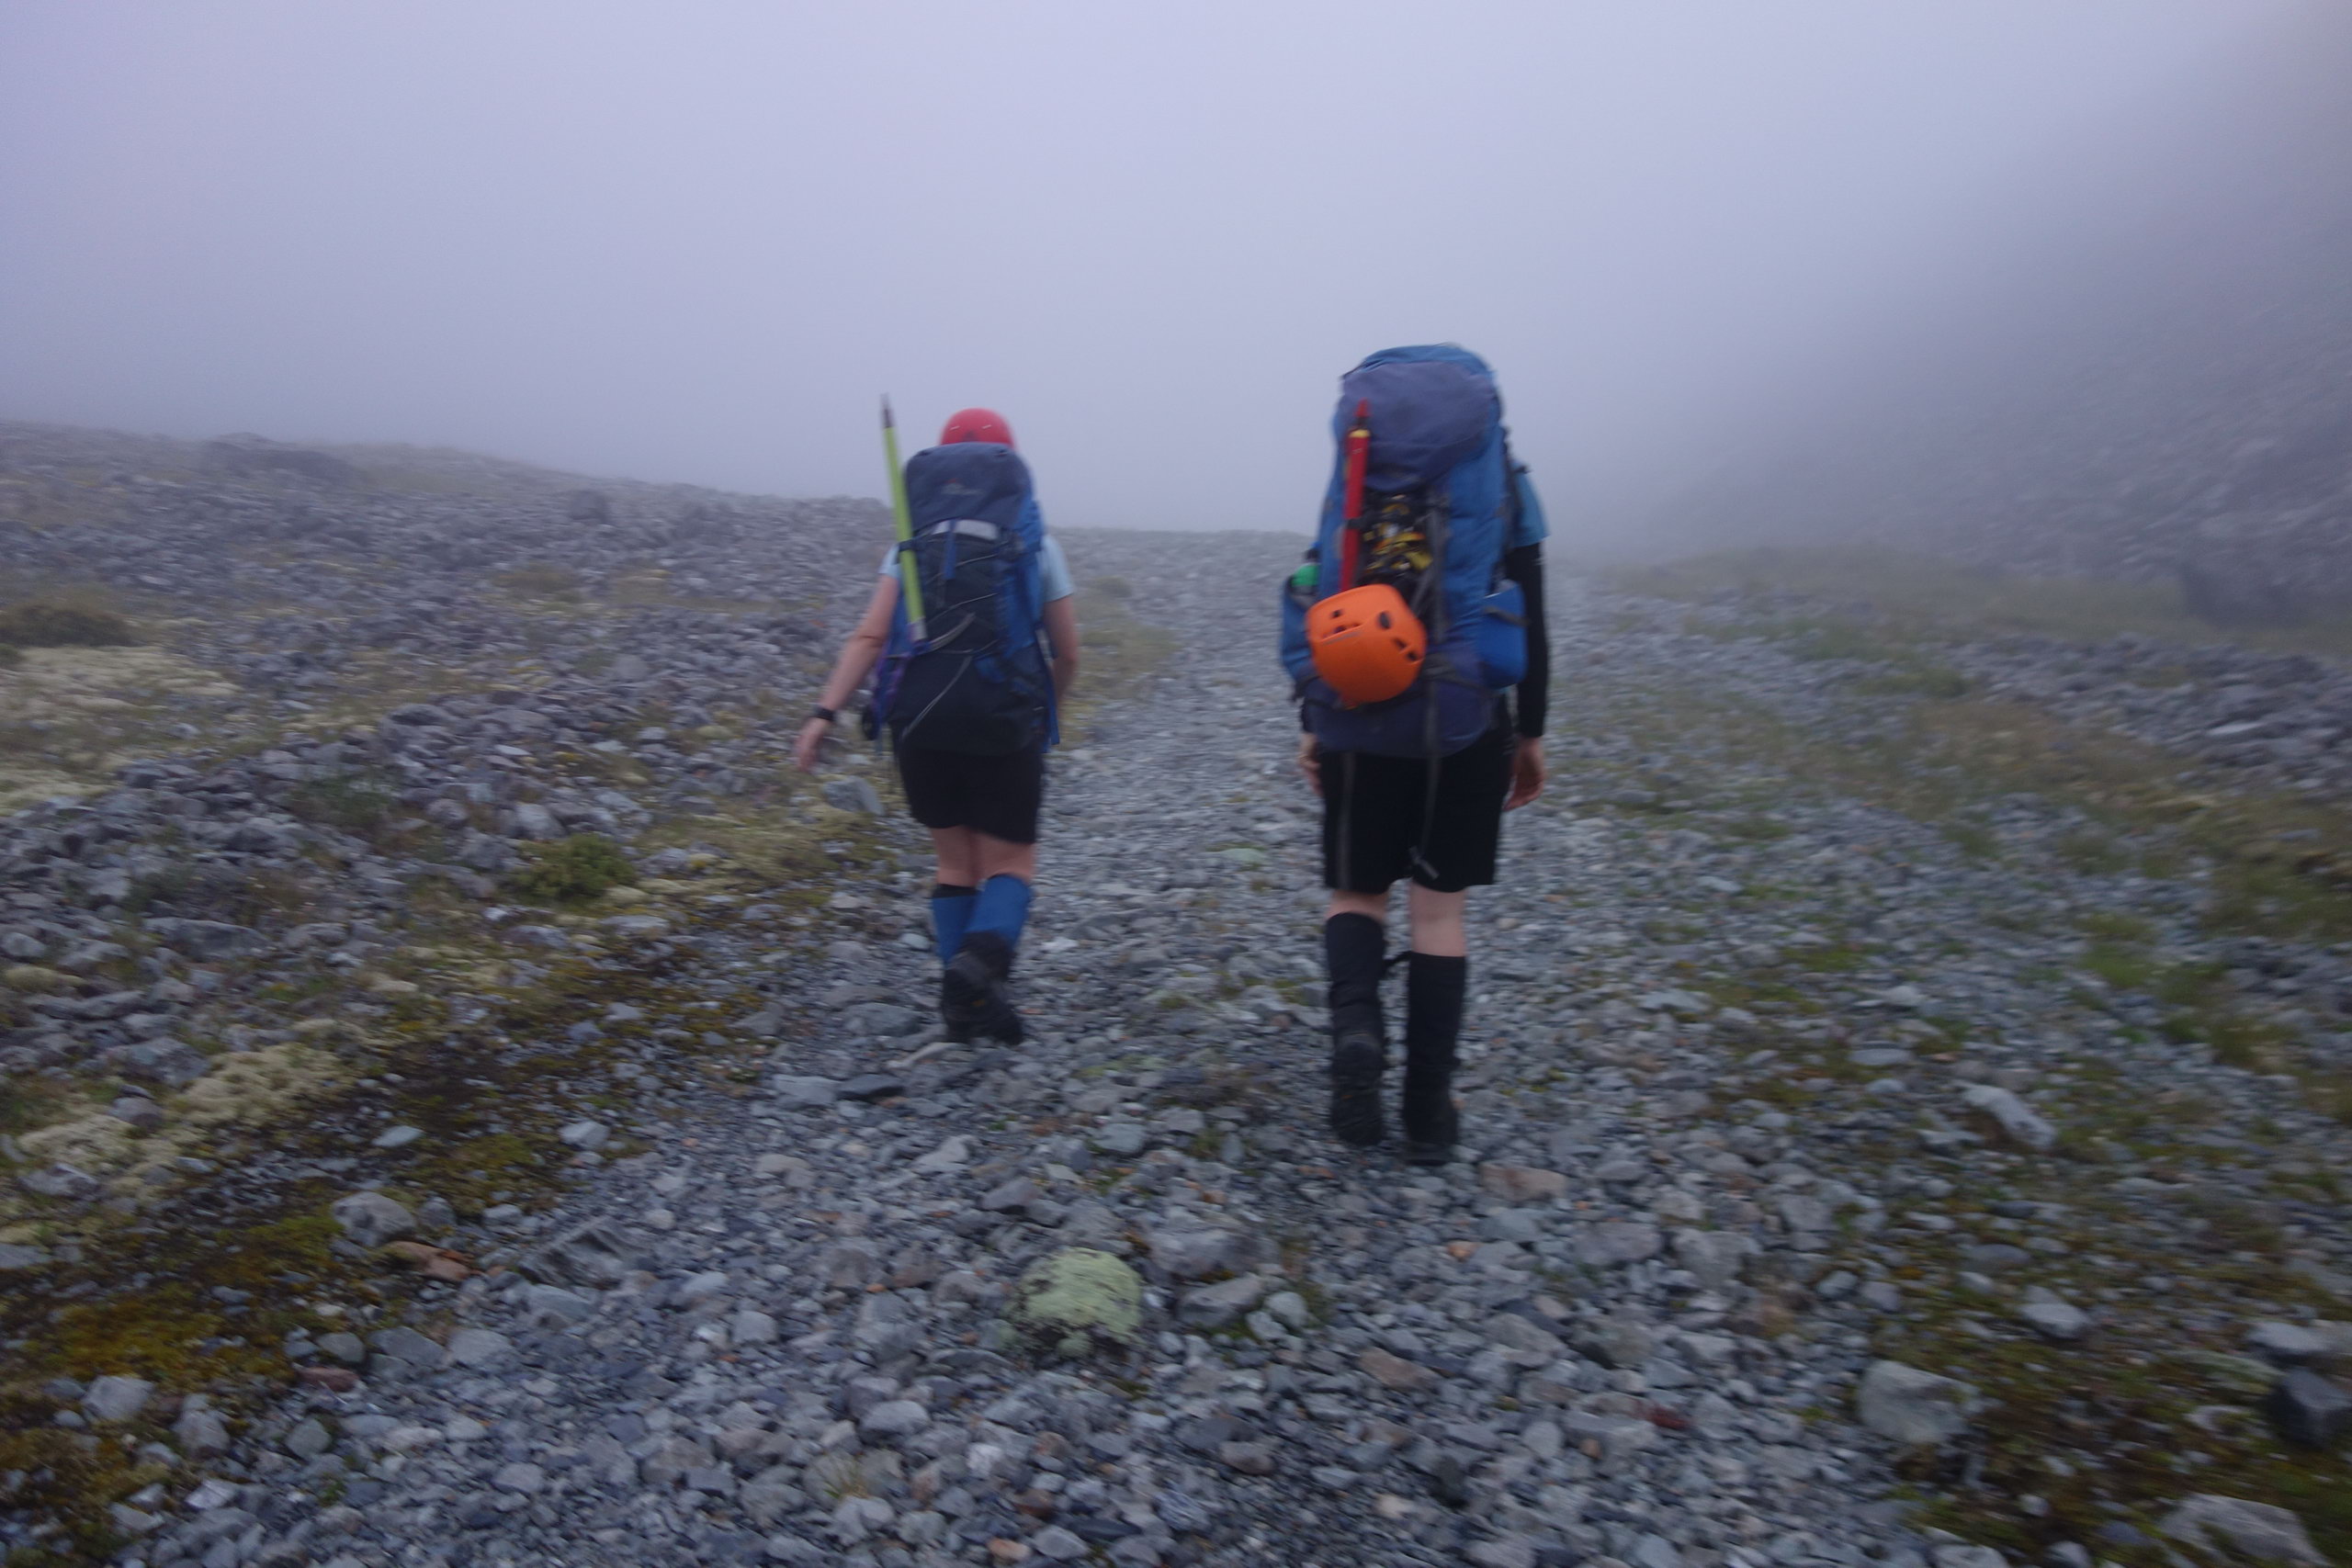 Gina and Hazel heading off into the mist (Ball Pass Dec 2013)